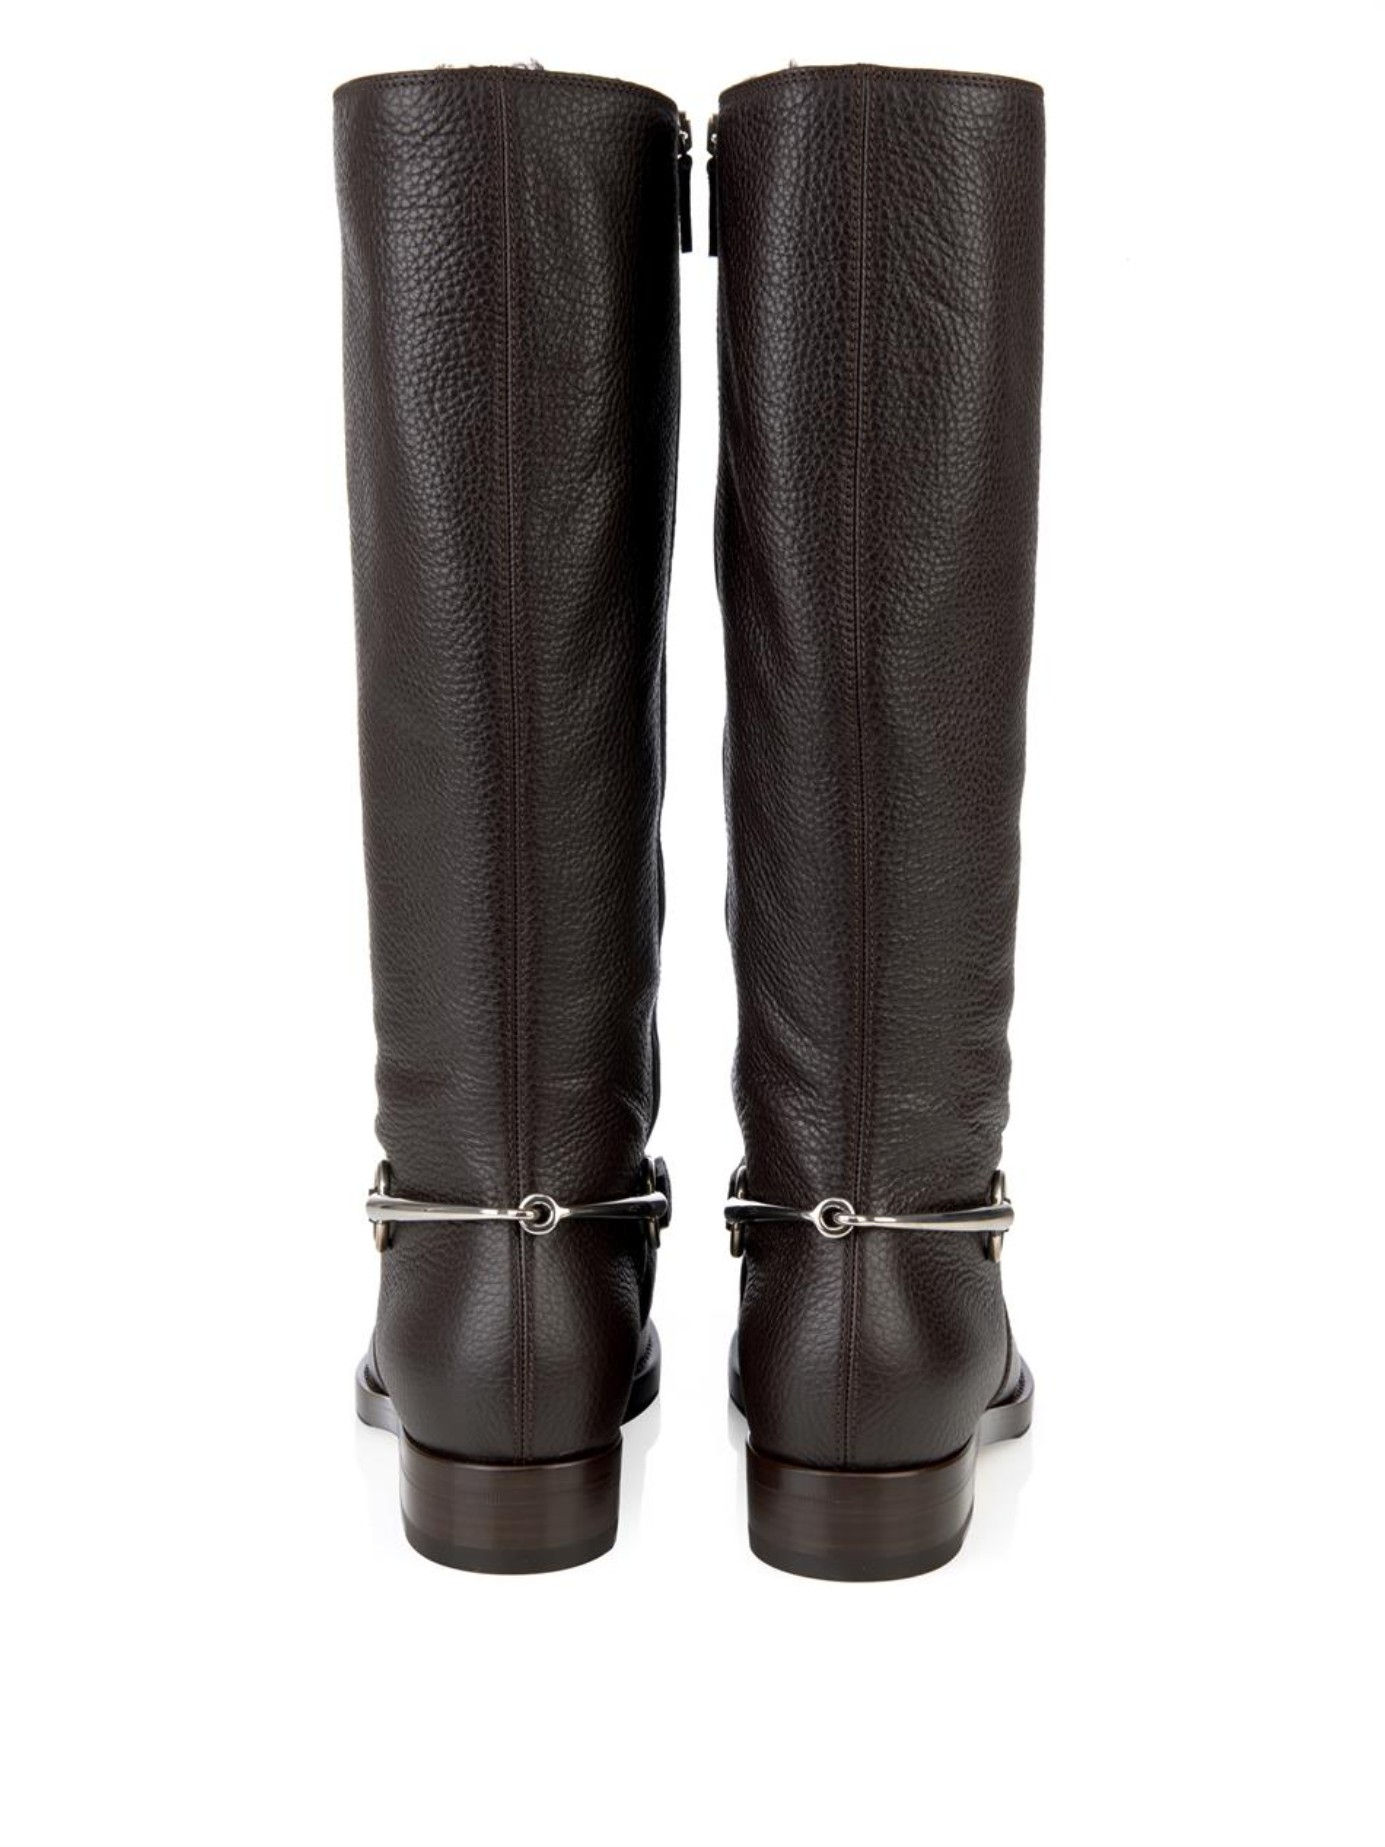 Gucci Horsebit Leather Riding Boots in Brown - Lyst